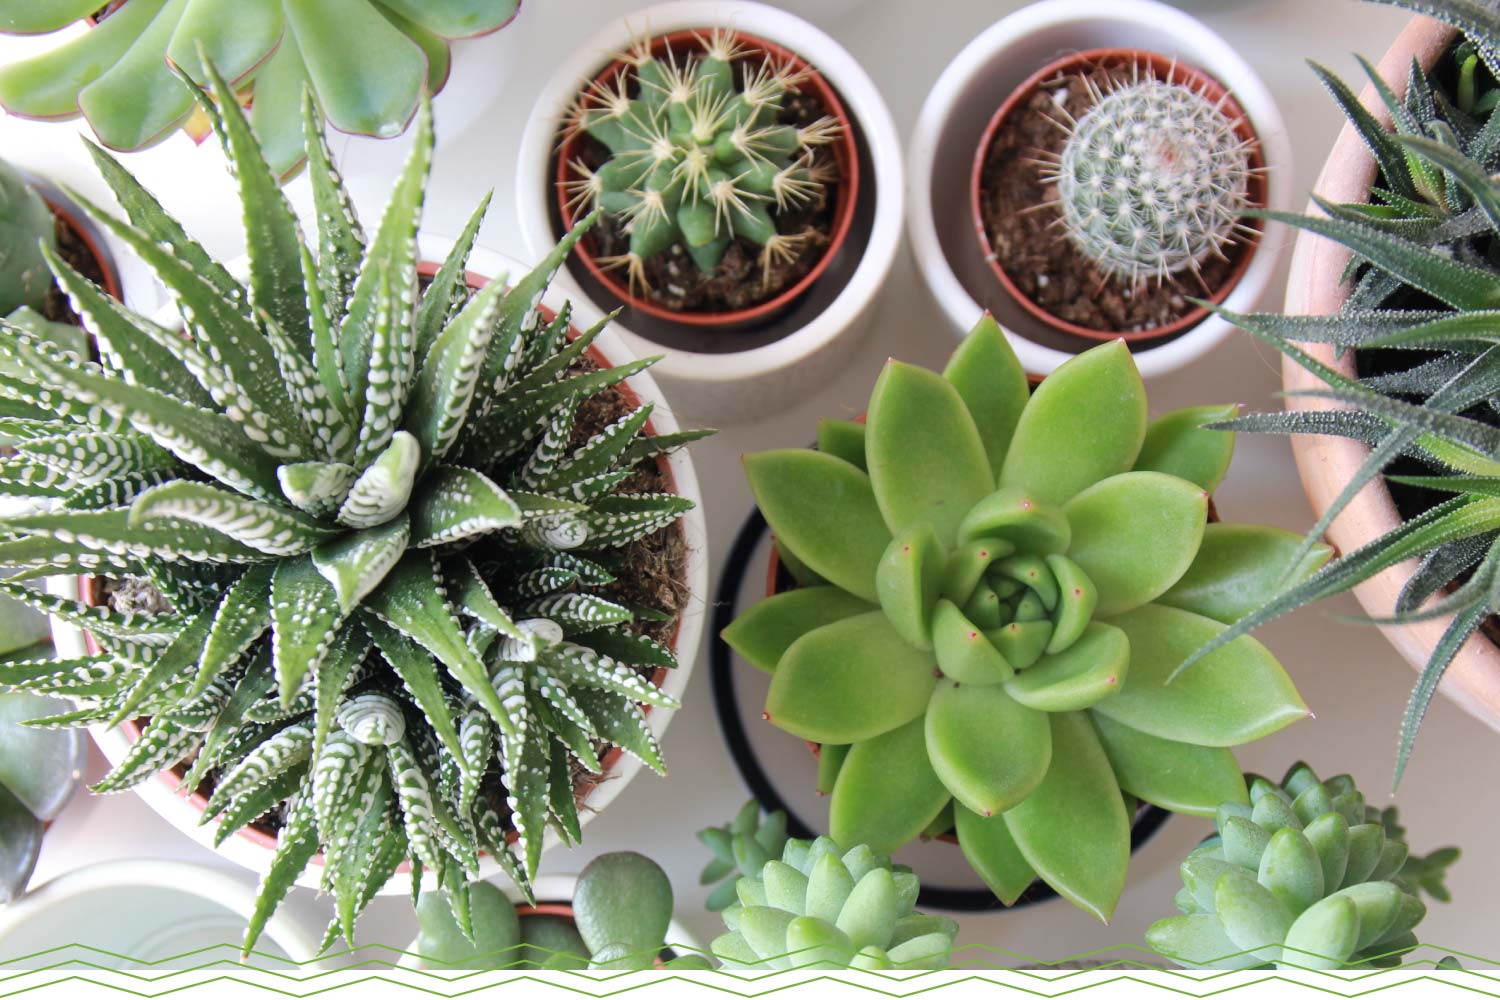 Top 10 Succulents You Can Easily Grow at Home